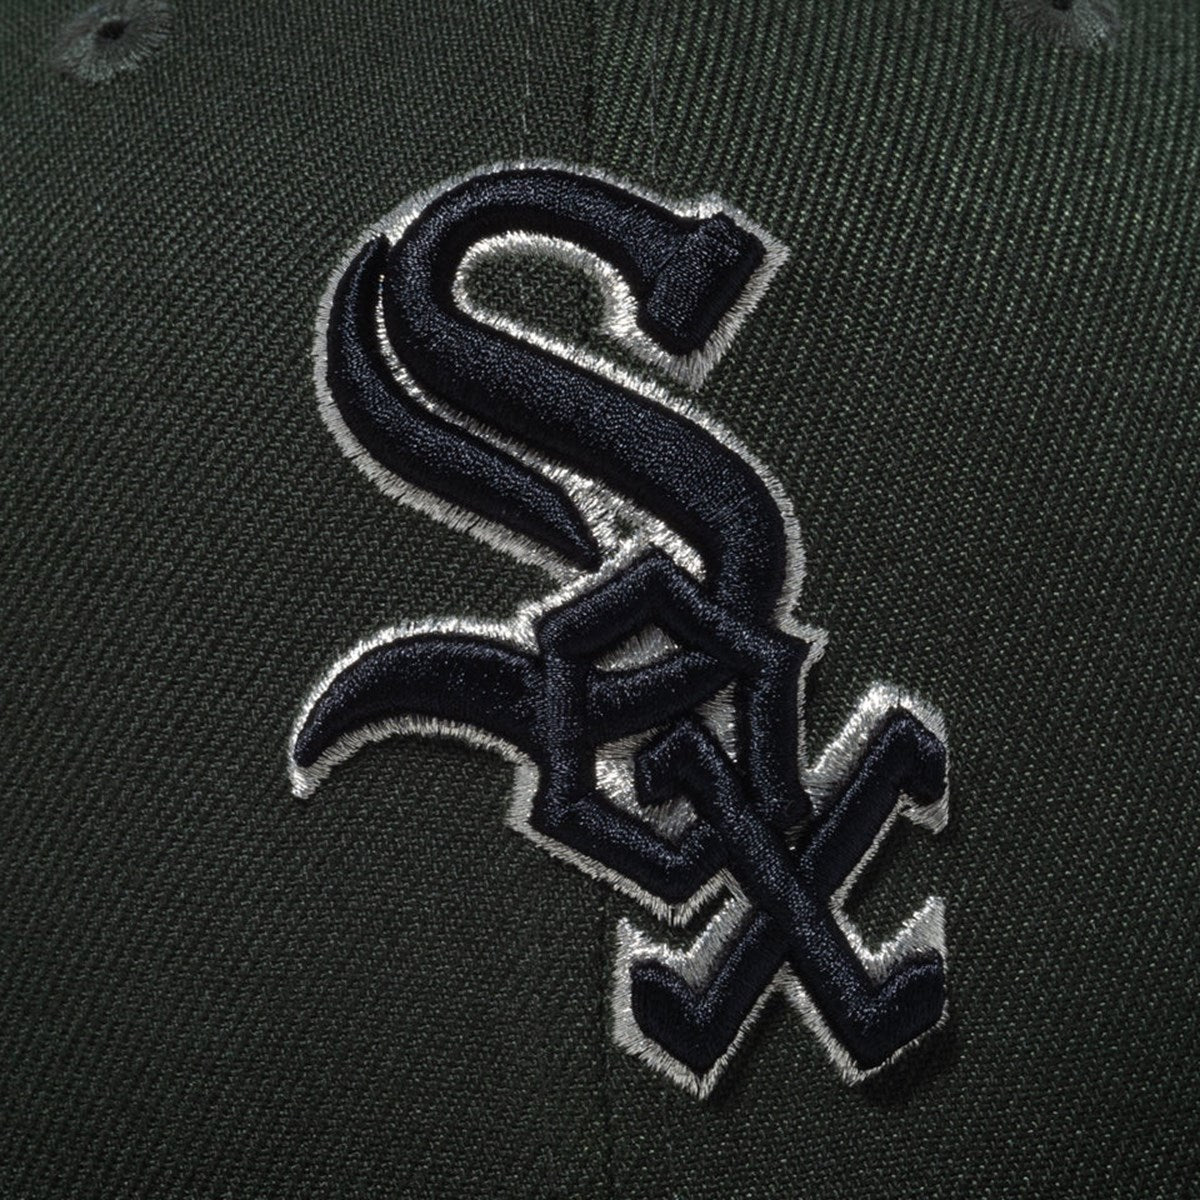 NEW ERA Chicago White Sox - 59FIFTY Vintage Color DSEA【14174593】